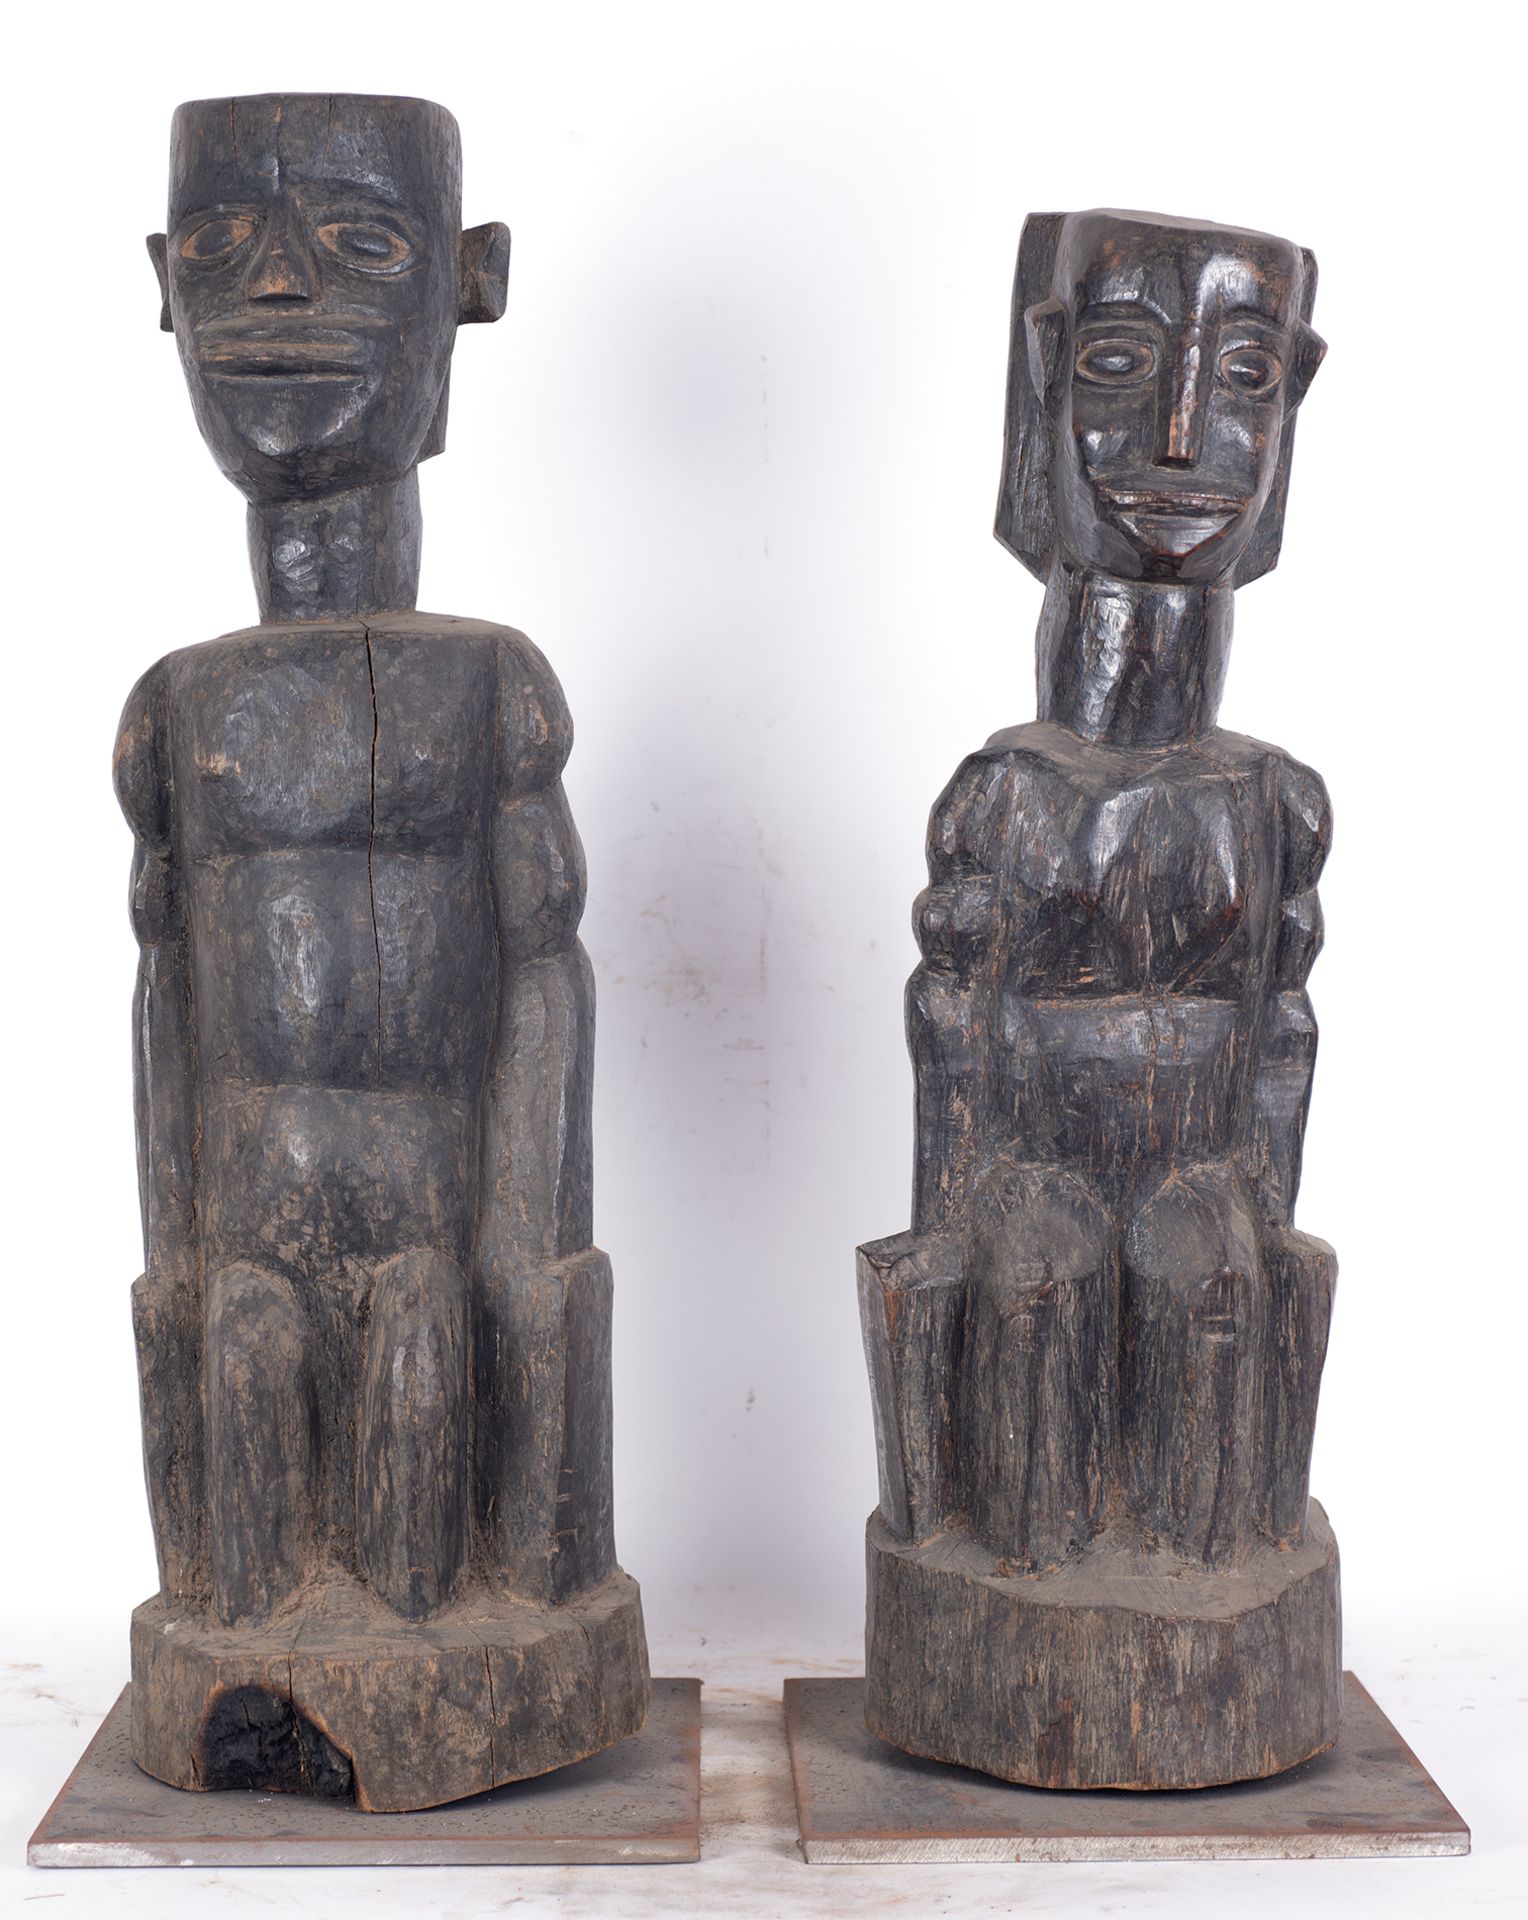 Pair of figures of man and woman, possibly Oceania